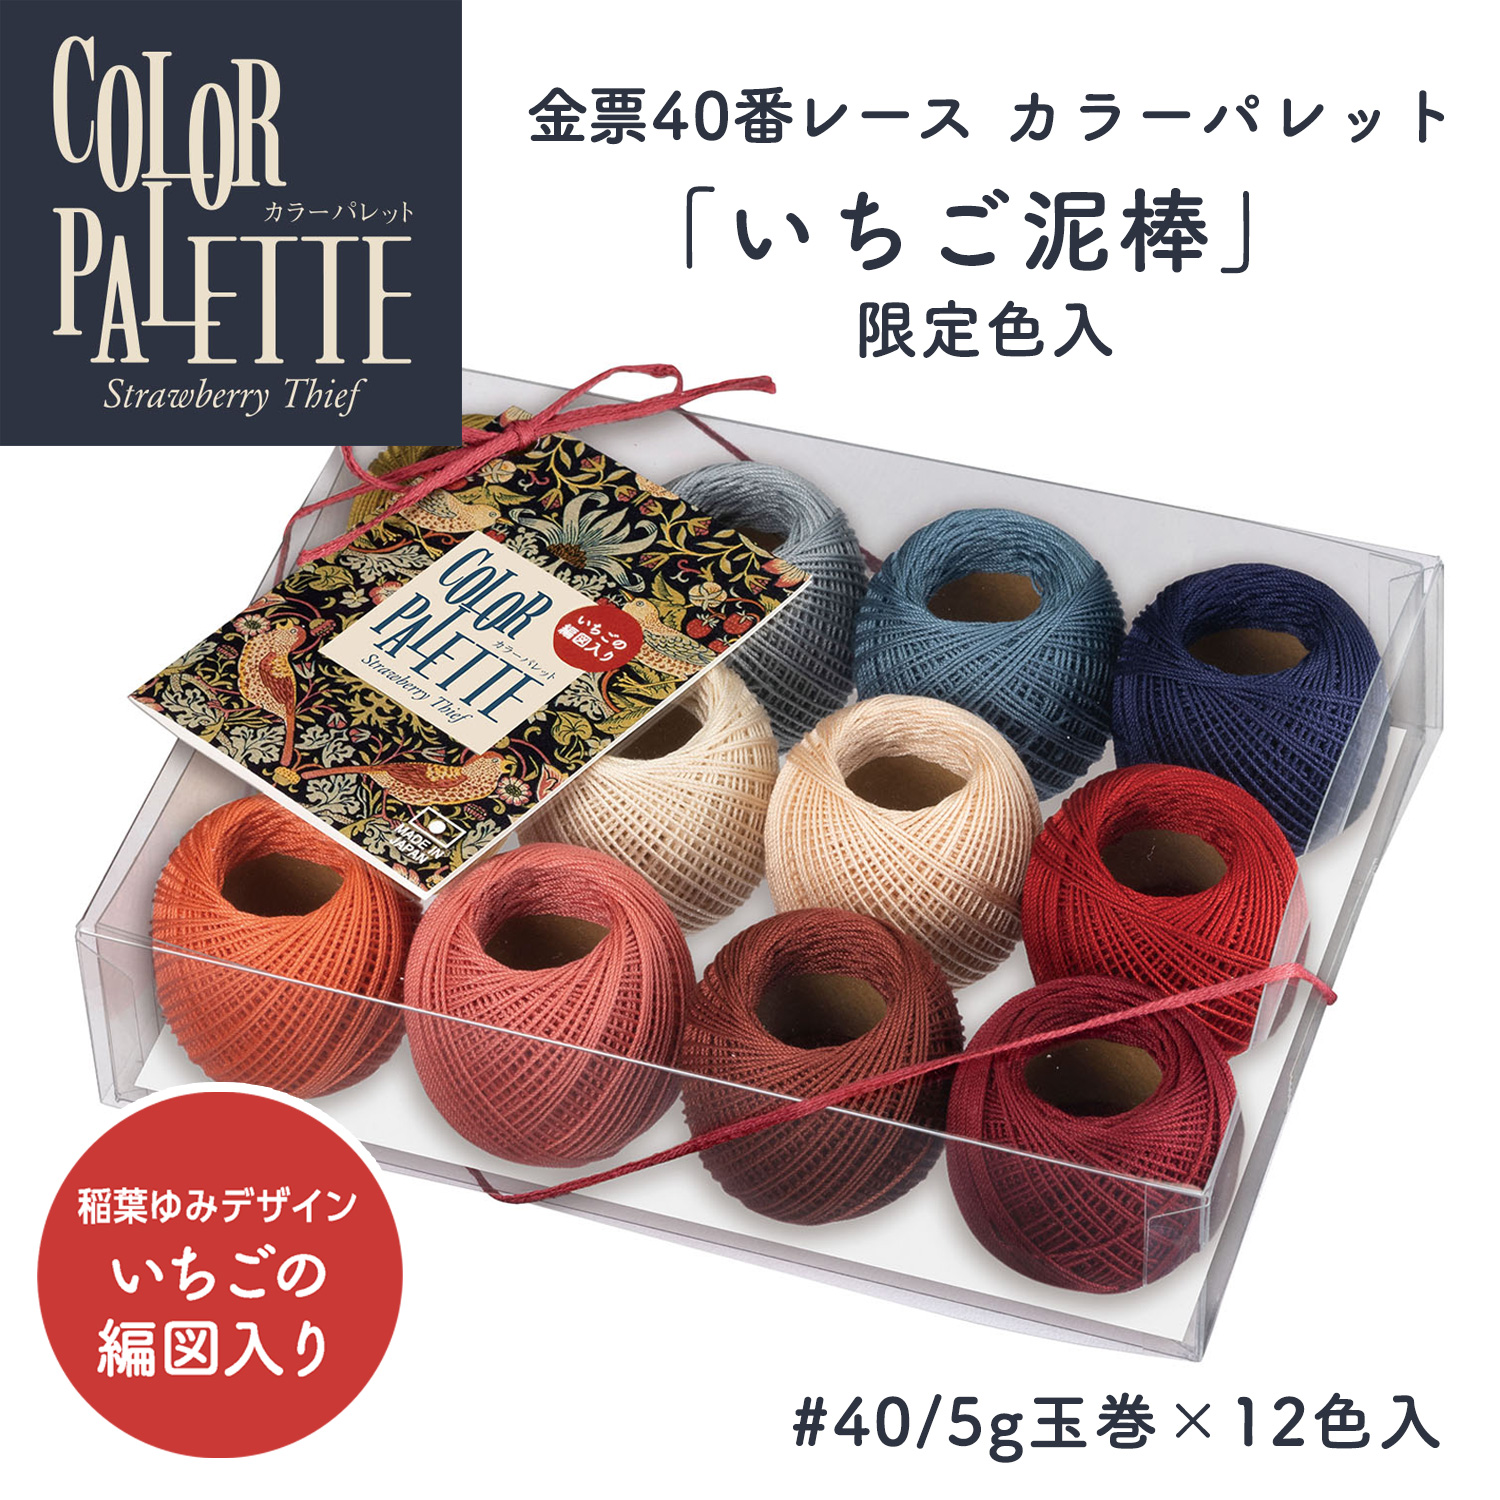 OLY054347 Olympus Gold Label Color pallet 「strawberry thief」 #40/5g 12colors (box)